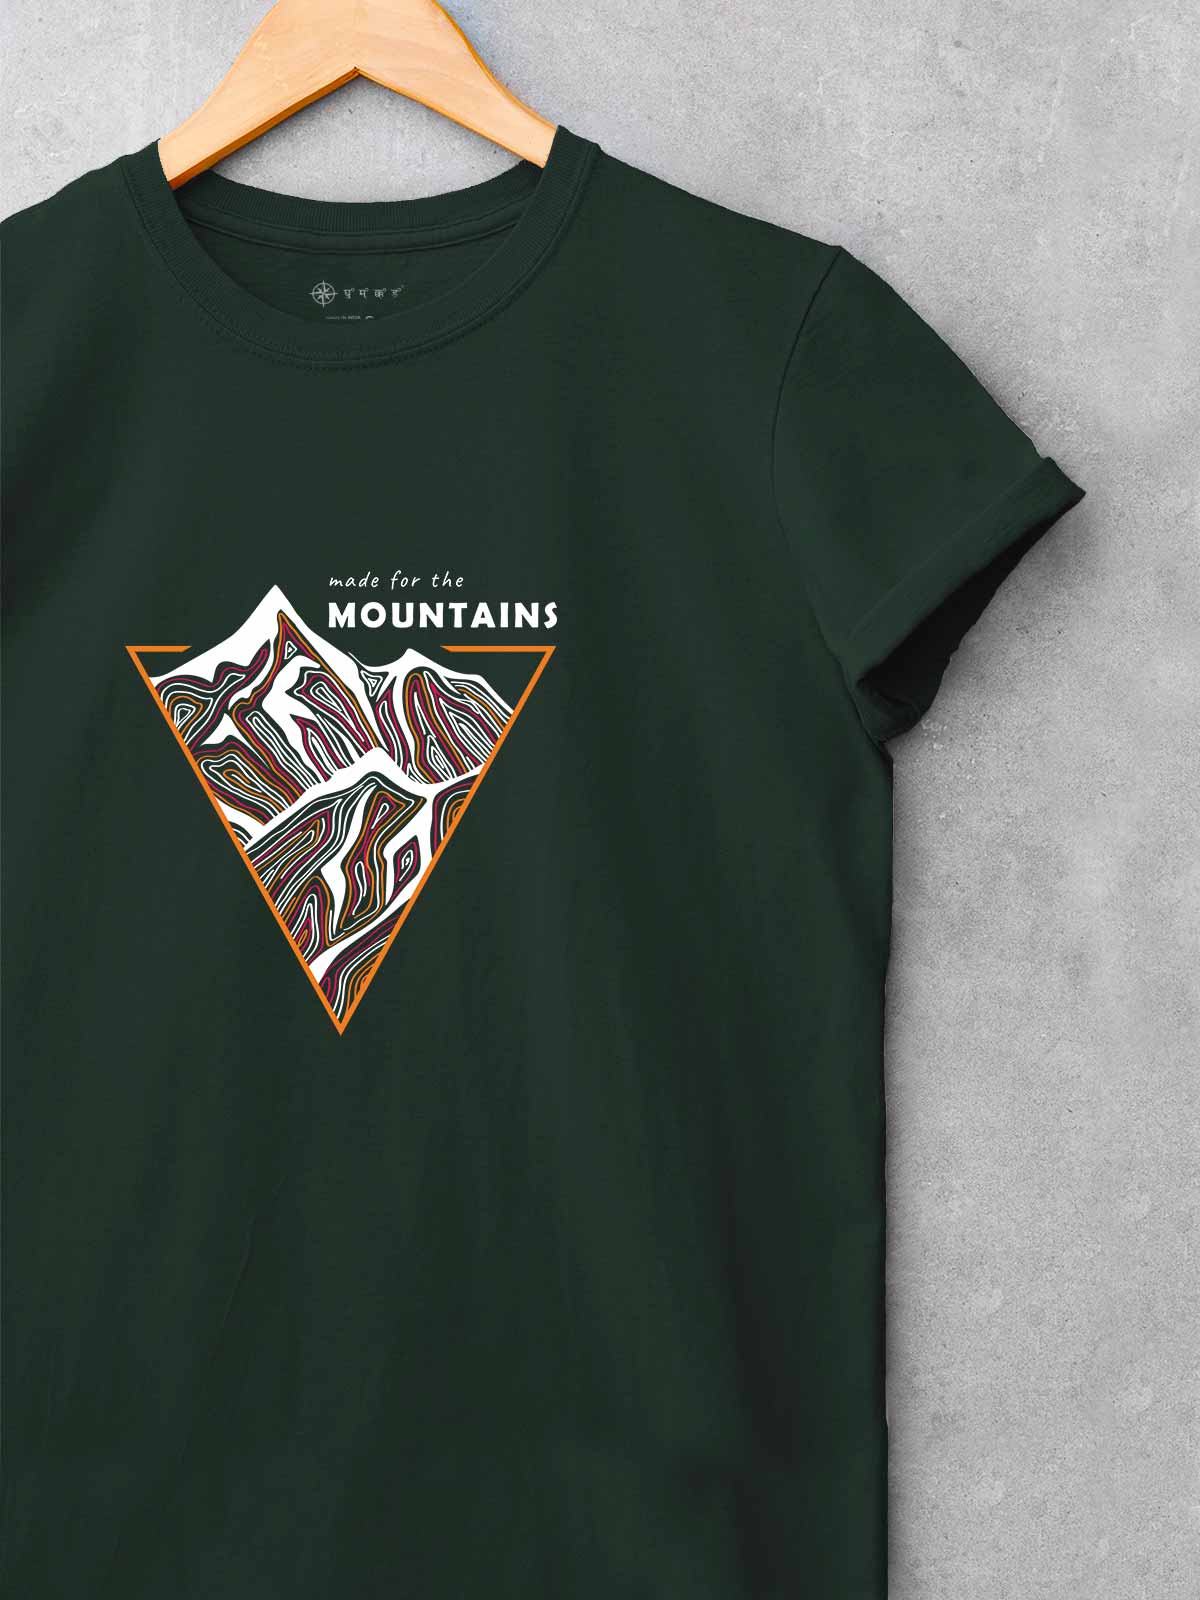 Made-for-mountain-printed-t-shirt-for-men by Ghumakkad